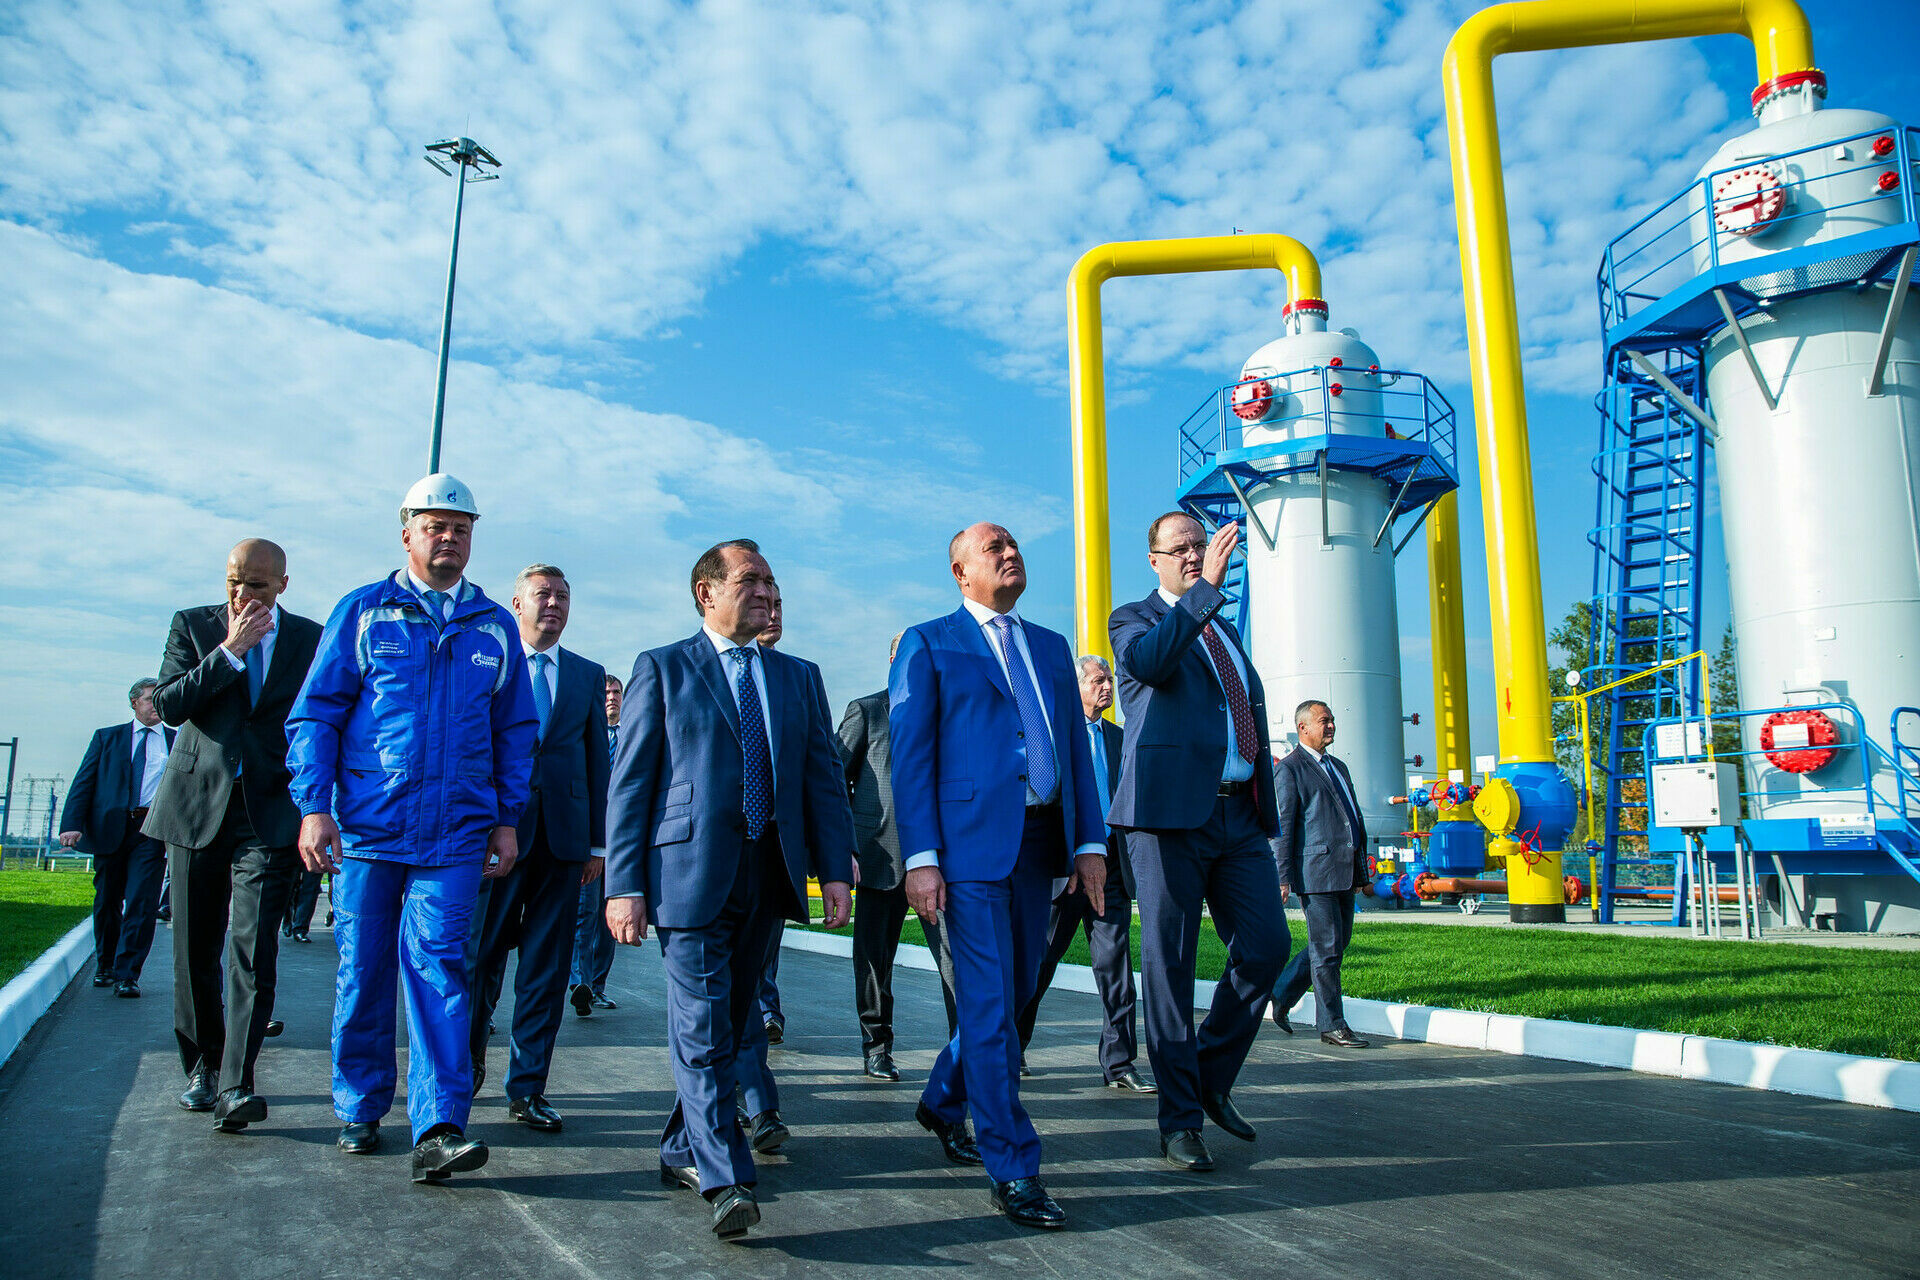 Gazprom doubles premiums to its top managers, despite the multibillion losses